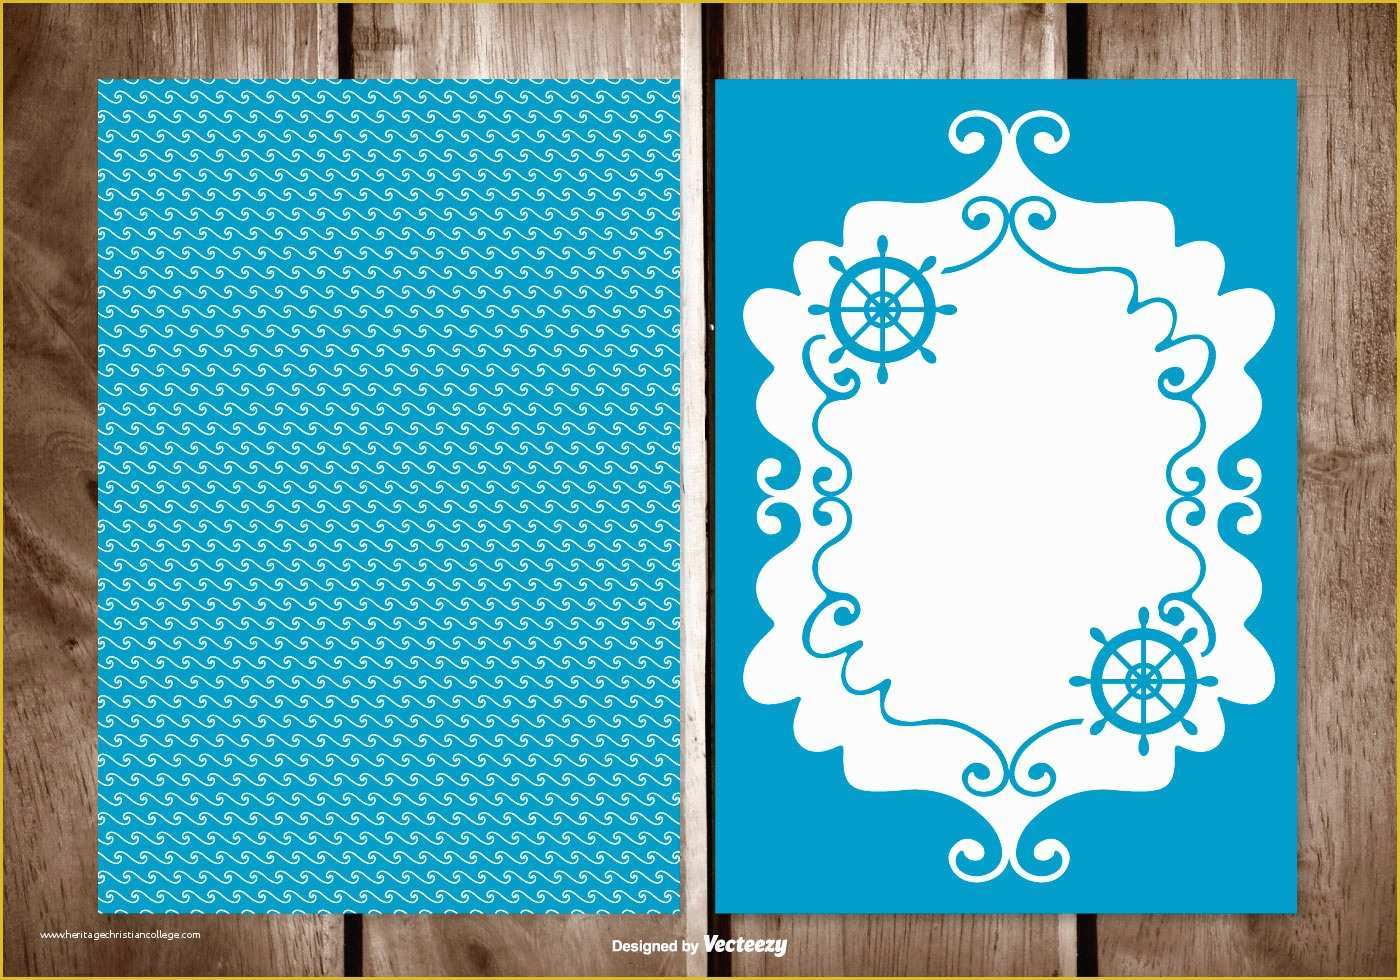 Free Postcard Template Of Blank Greeting Card Free Vector Art Free Downloads